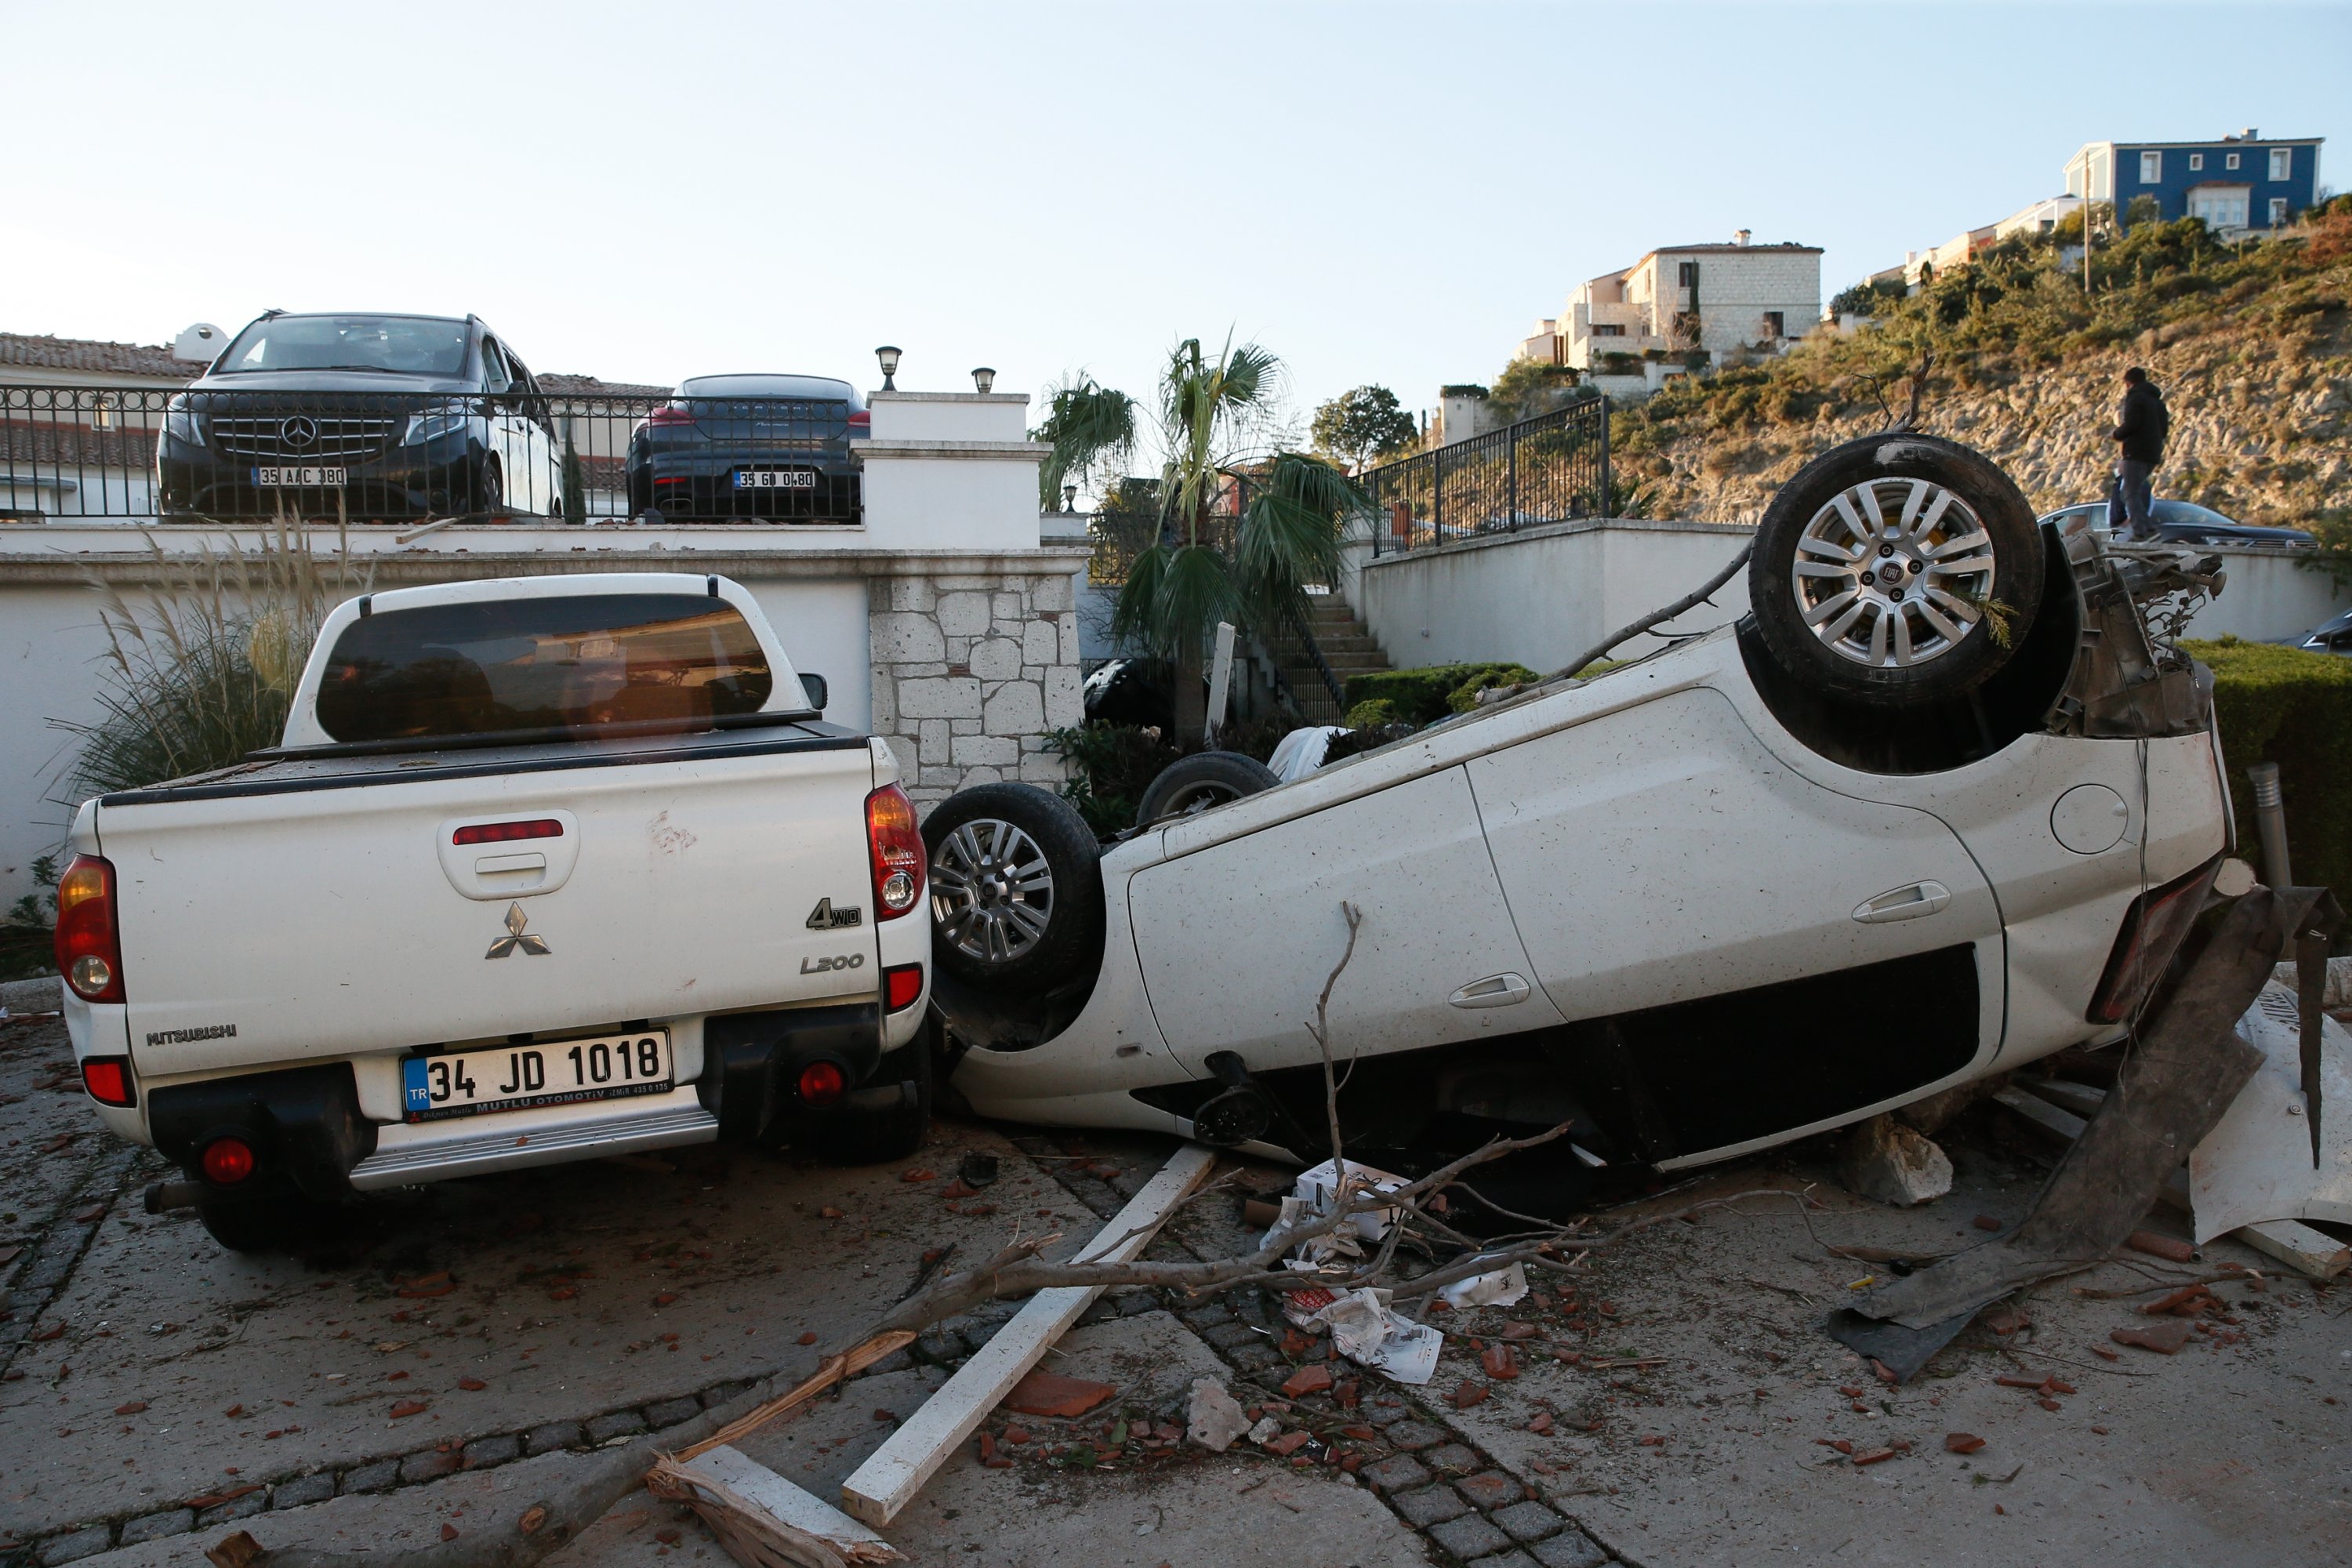 A car lies upside down after being flipped during a heavy storm in Çeşme, Izmir province, western Turkey, Feb. 12, 2021. (AA Photo)